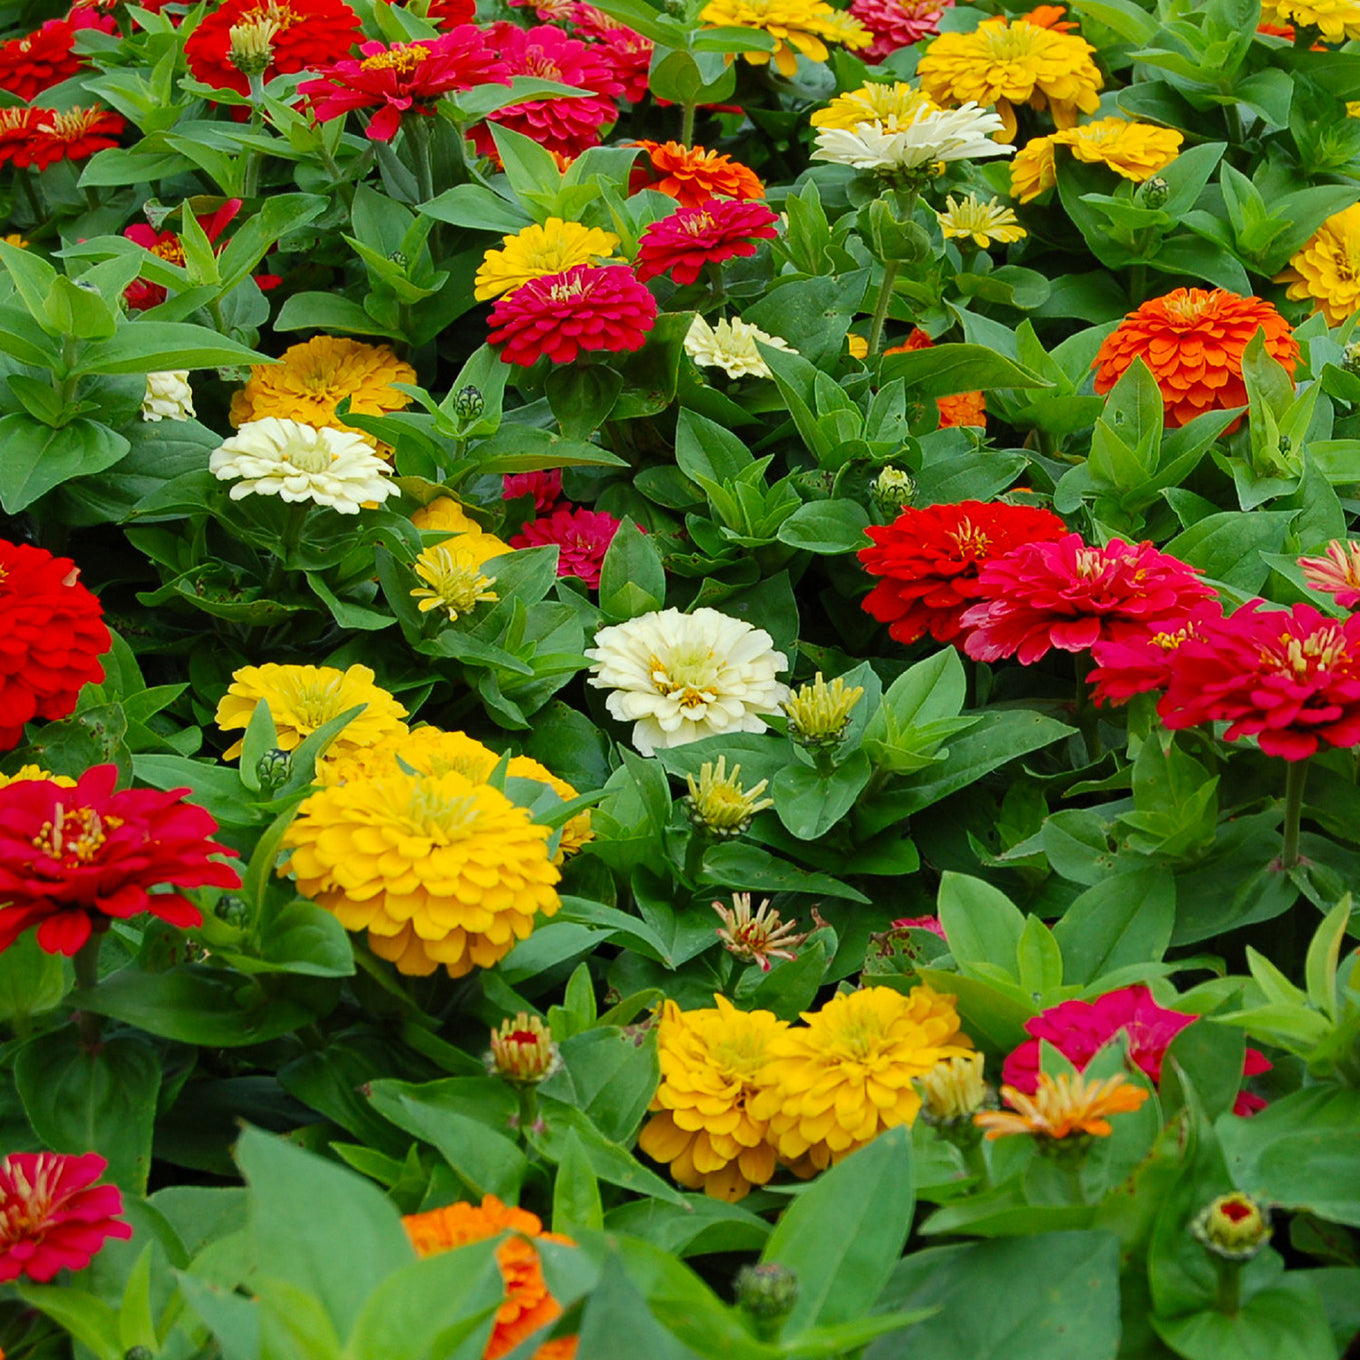 A sea of State Fair Zinnias blooming in colors of pink, yellow, red, and white. Picture shows matured zinnias.